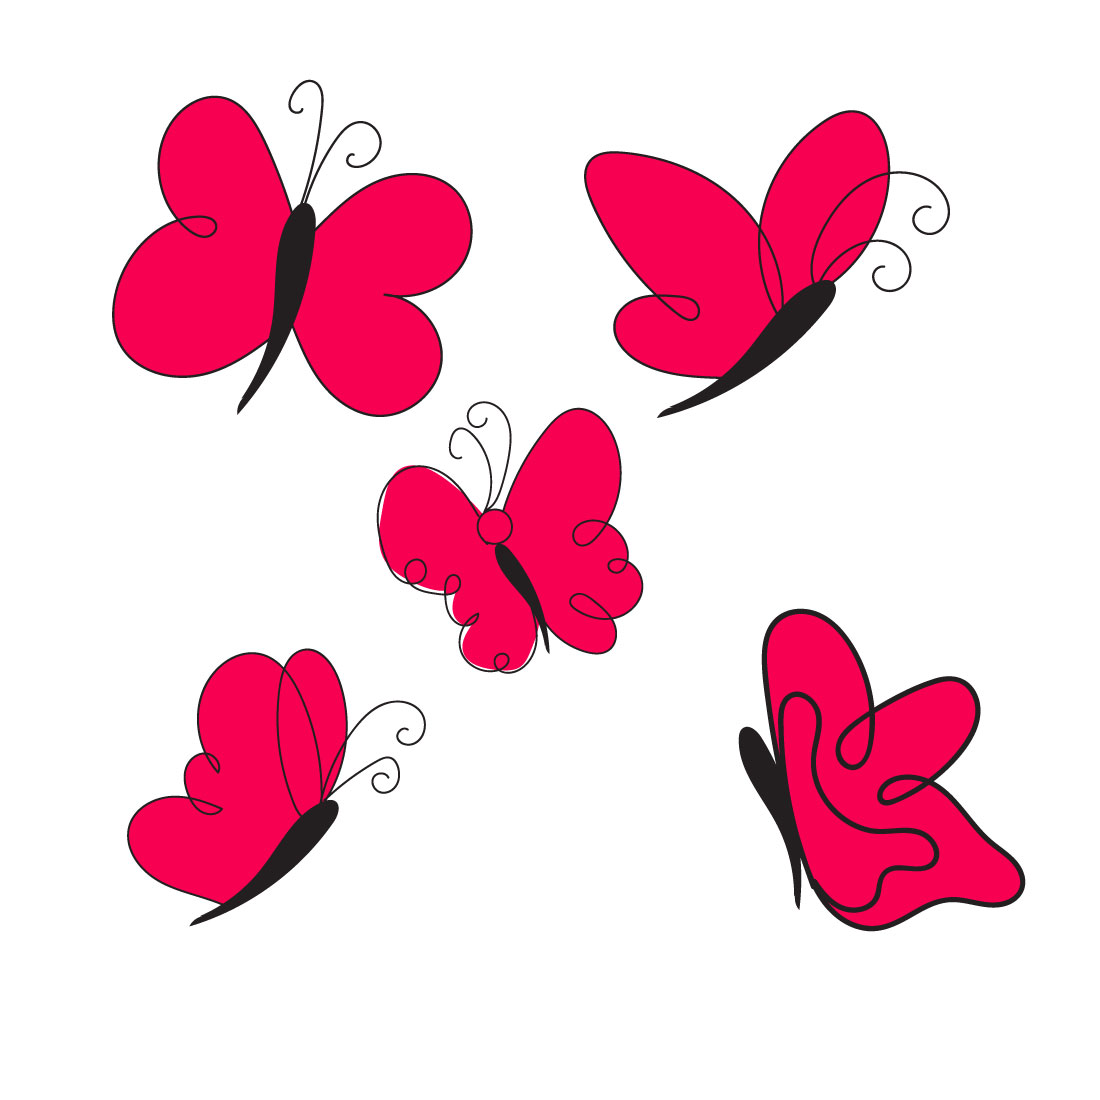 Group of pink butterflies flying through the air.